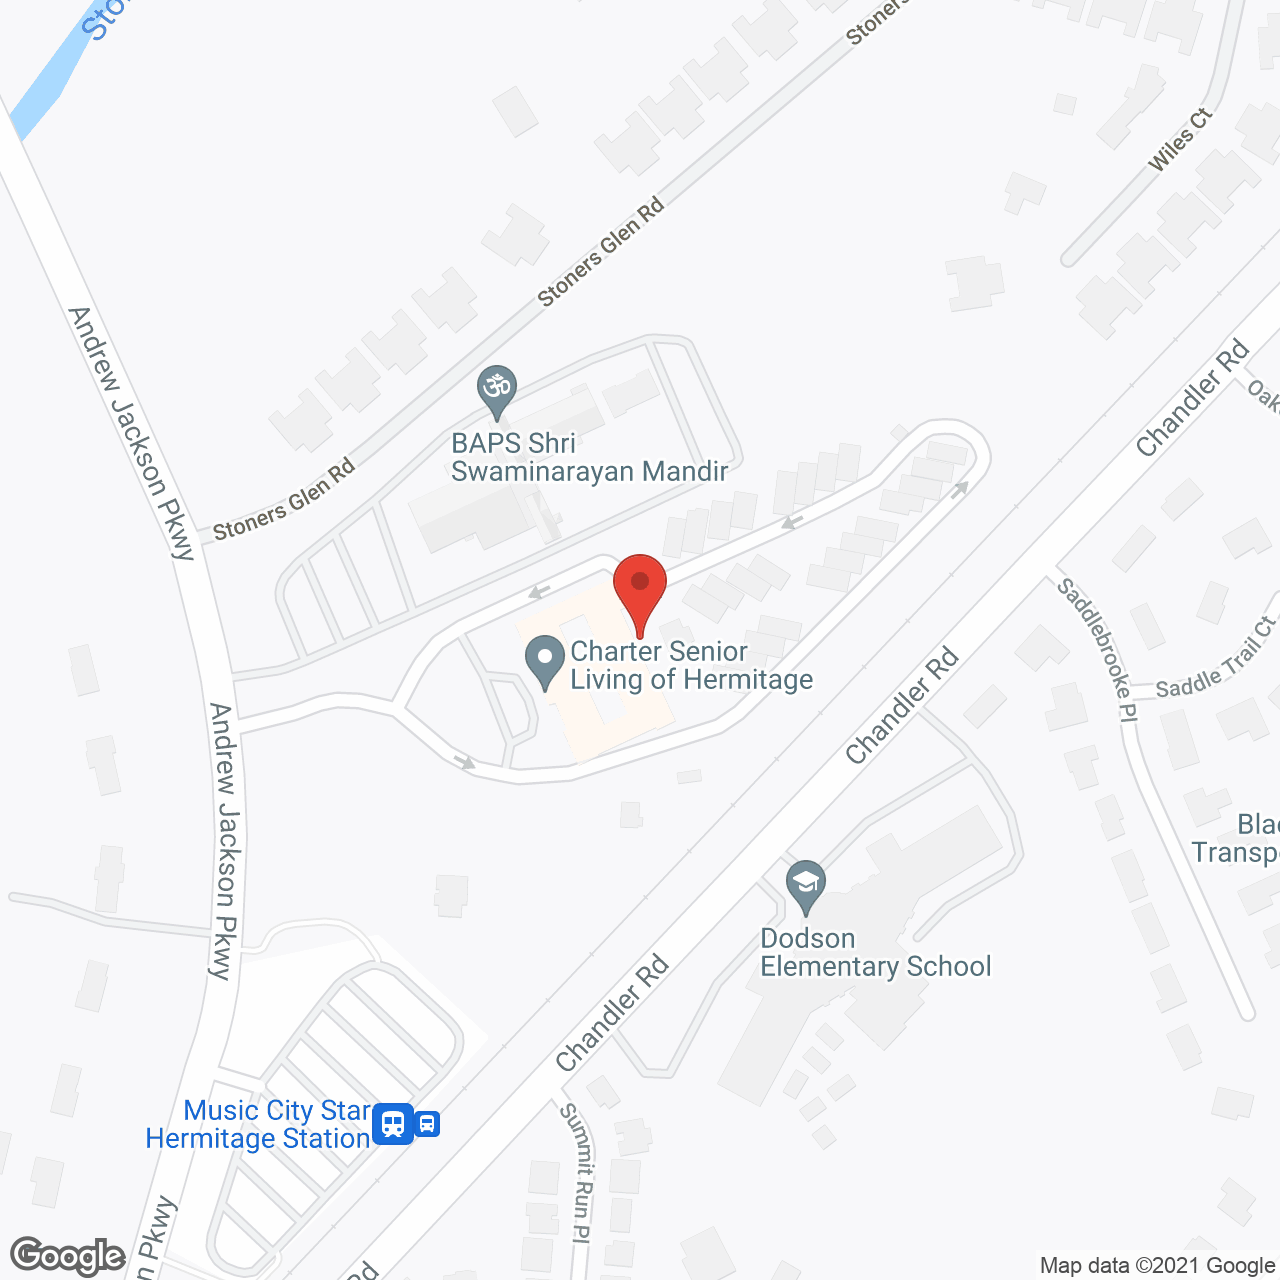 Charter Senior Living of Hermitage in google map